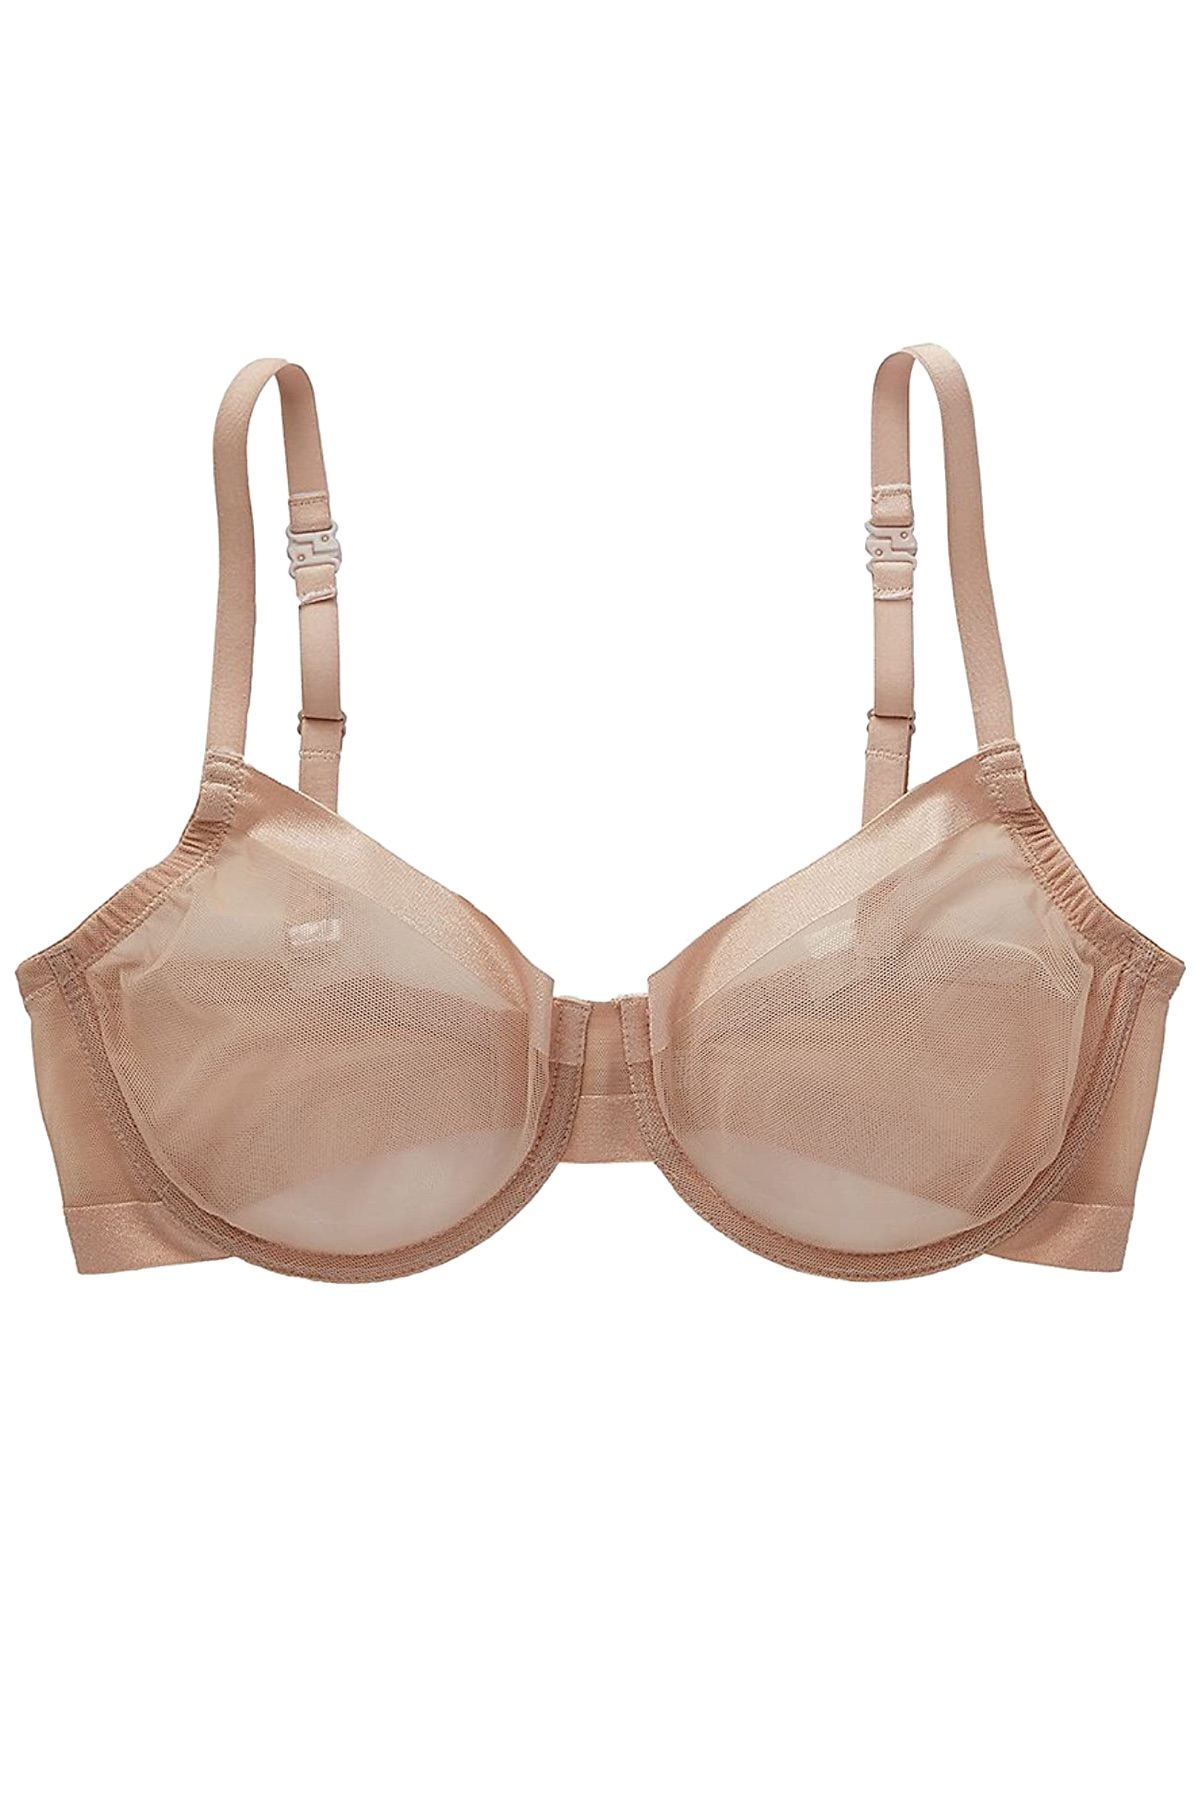 Le Mystere Lace Perfection Strapless Bra